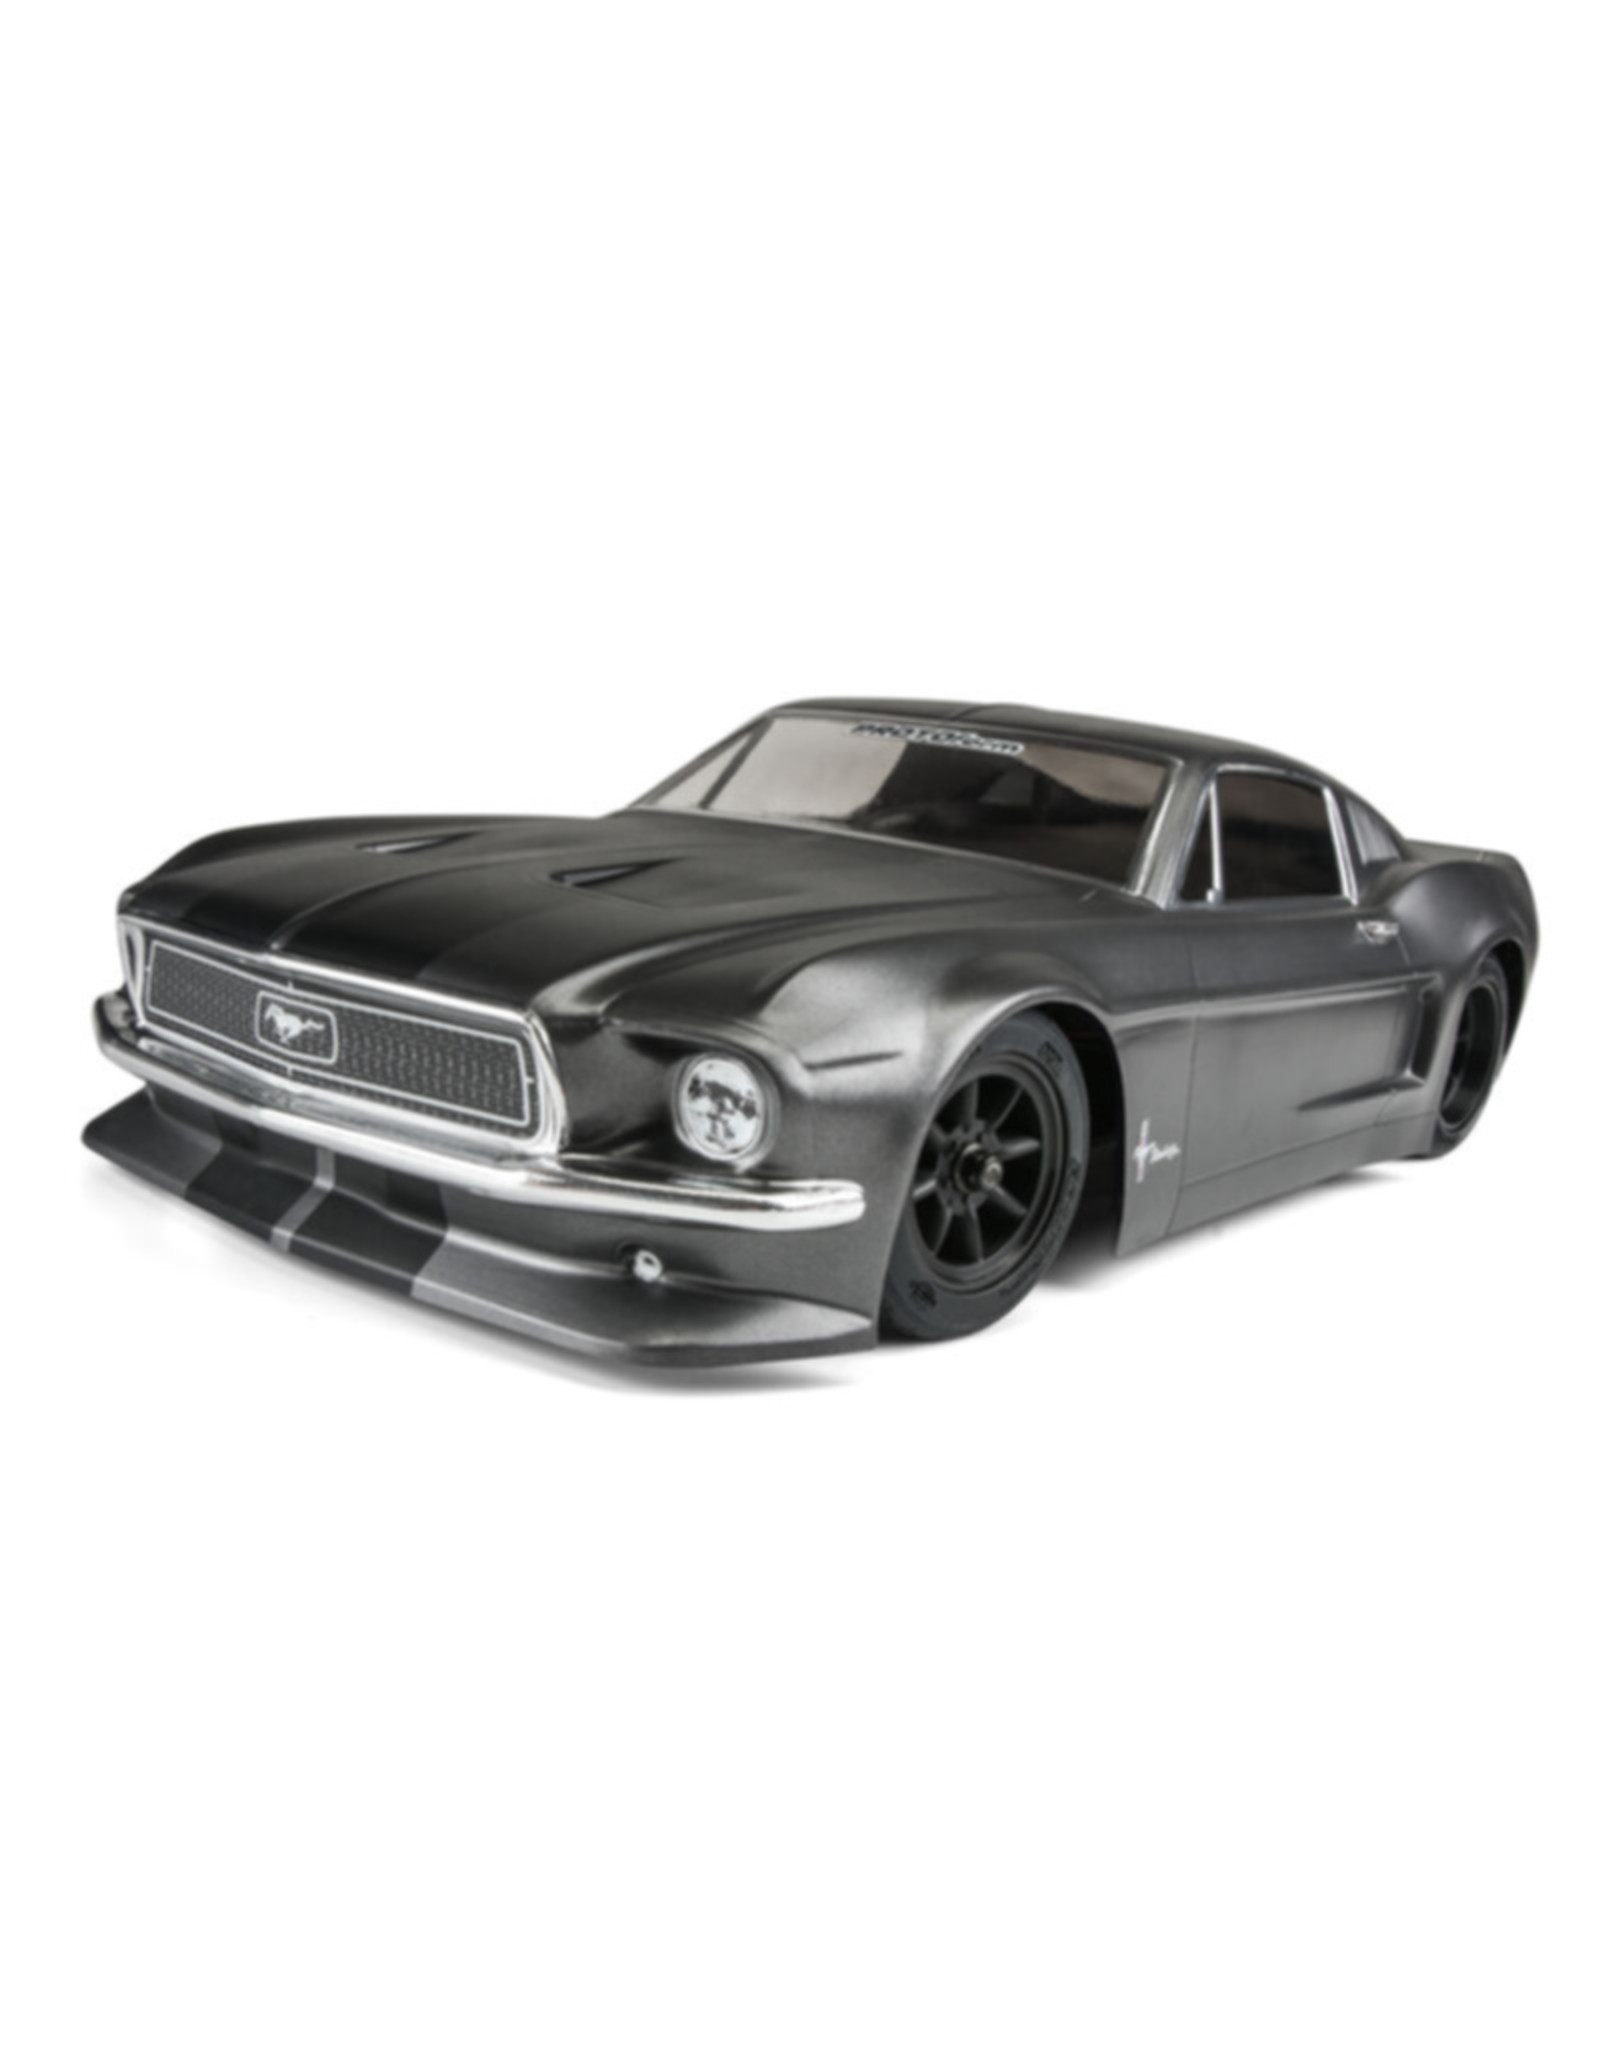 Protoform PRM155840 1968 Ford Mustang Clear Body VTA Class